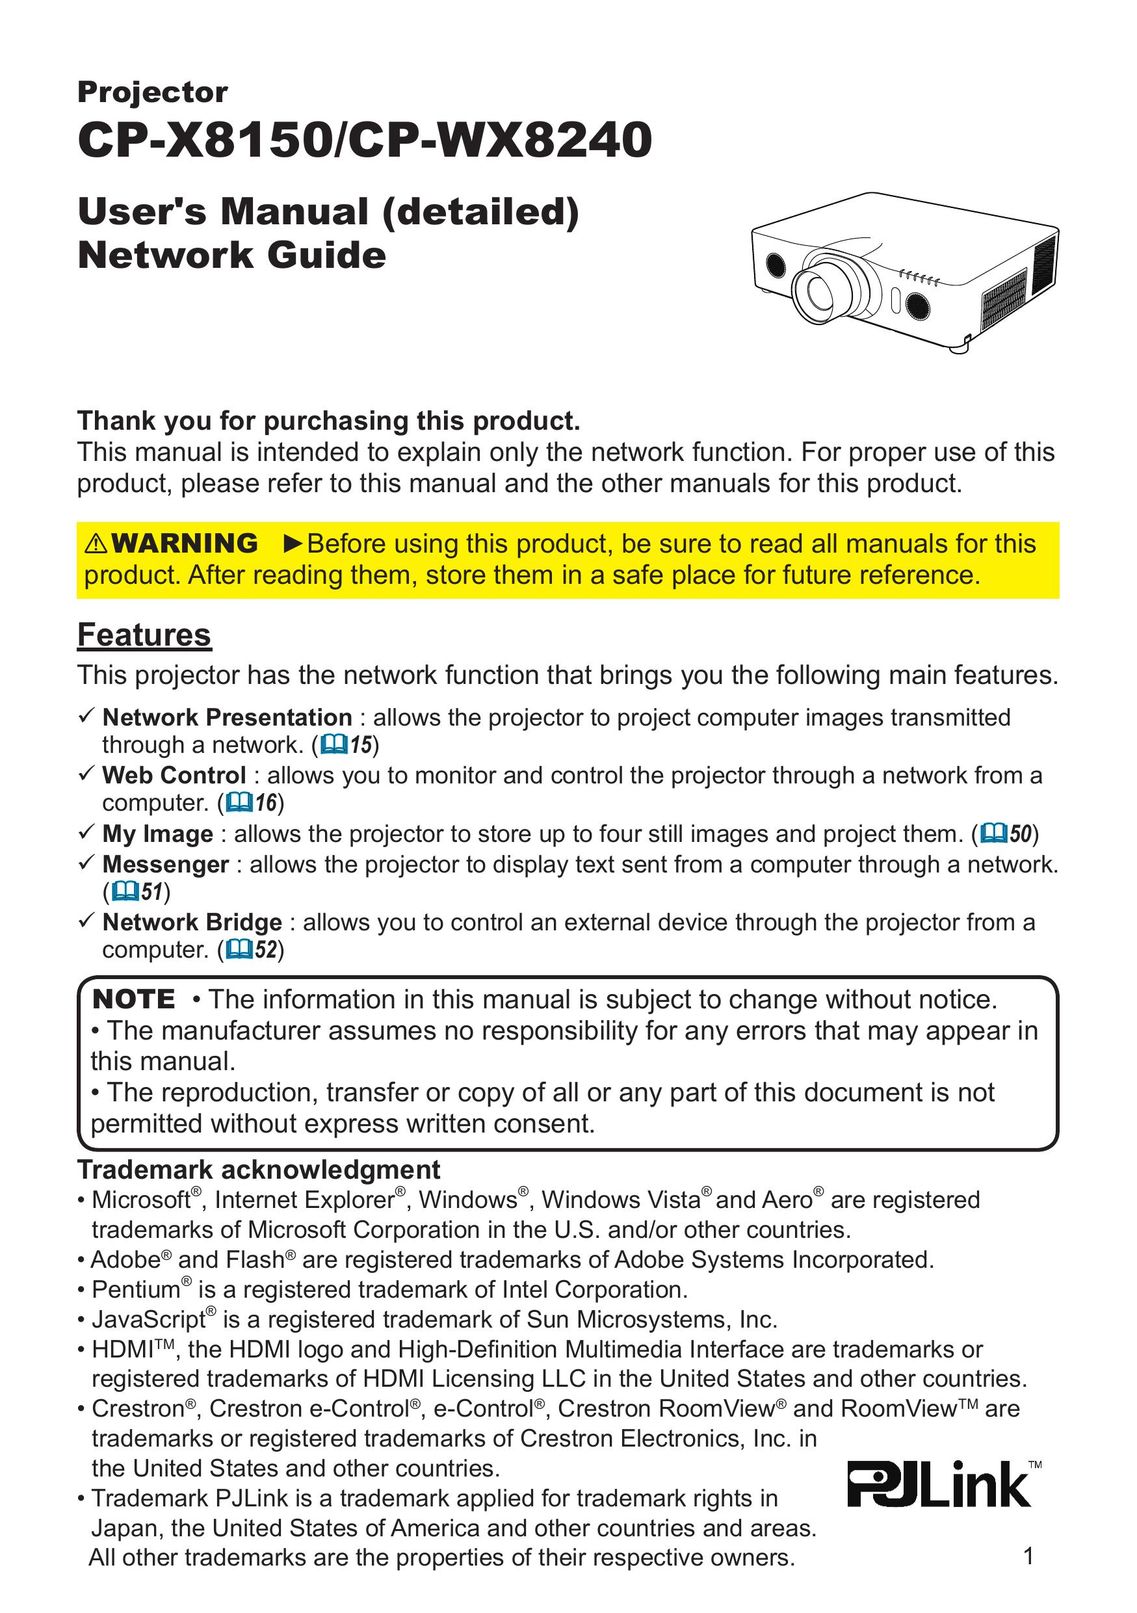 Crestron electronic CP-X8150 Projector User Manual